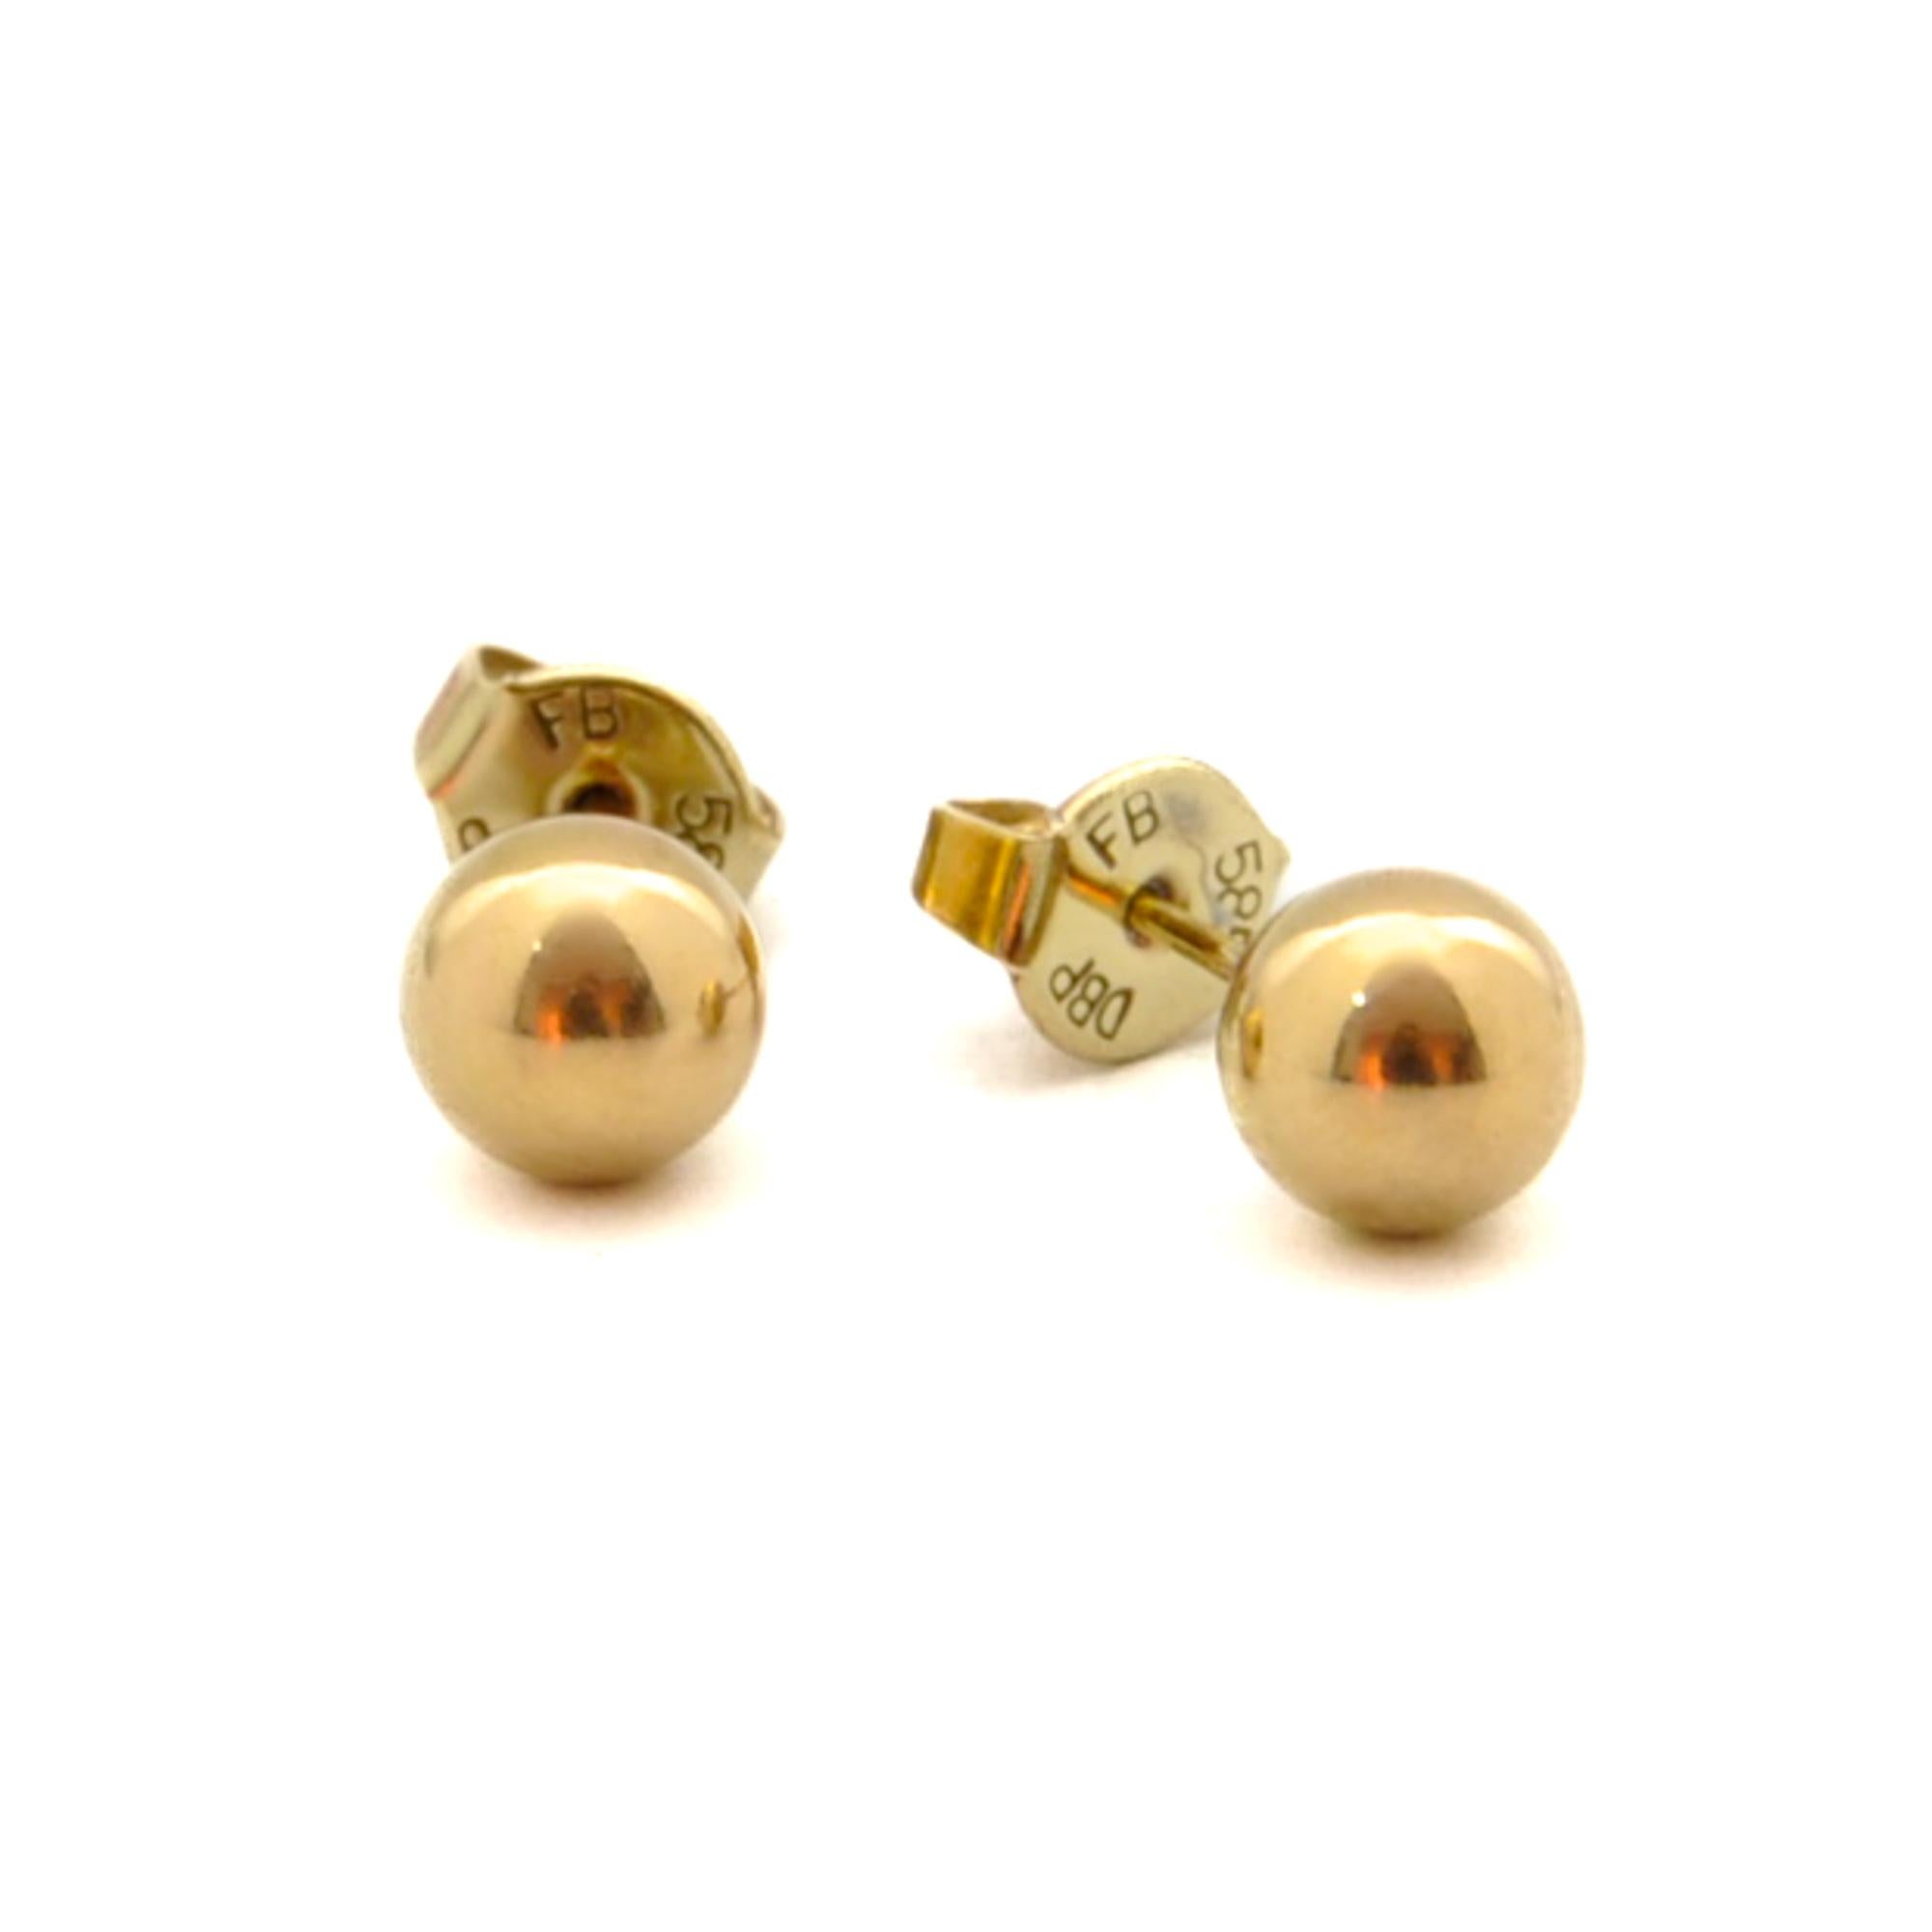 Vintage 14 Karat Gold Sphere Ball Stud Earrings In Good Condition For Sale In Rotterdam, NL